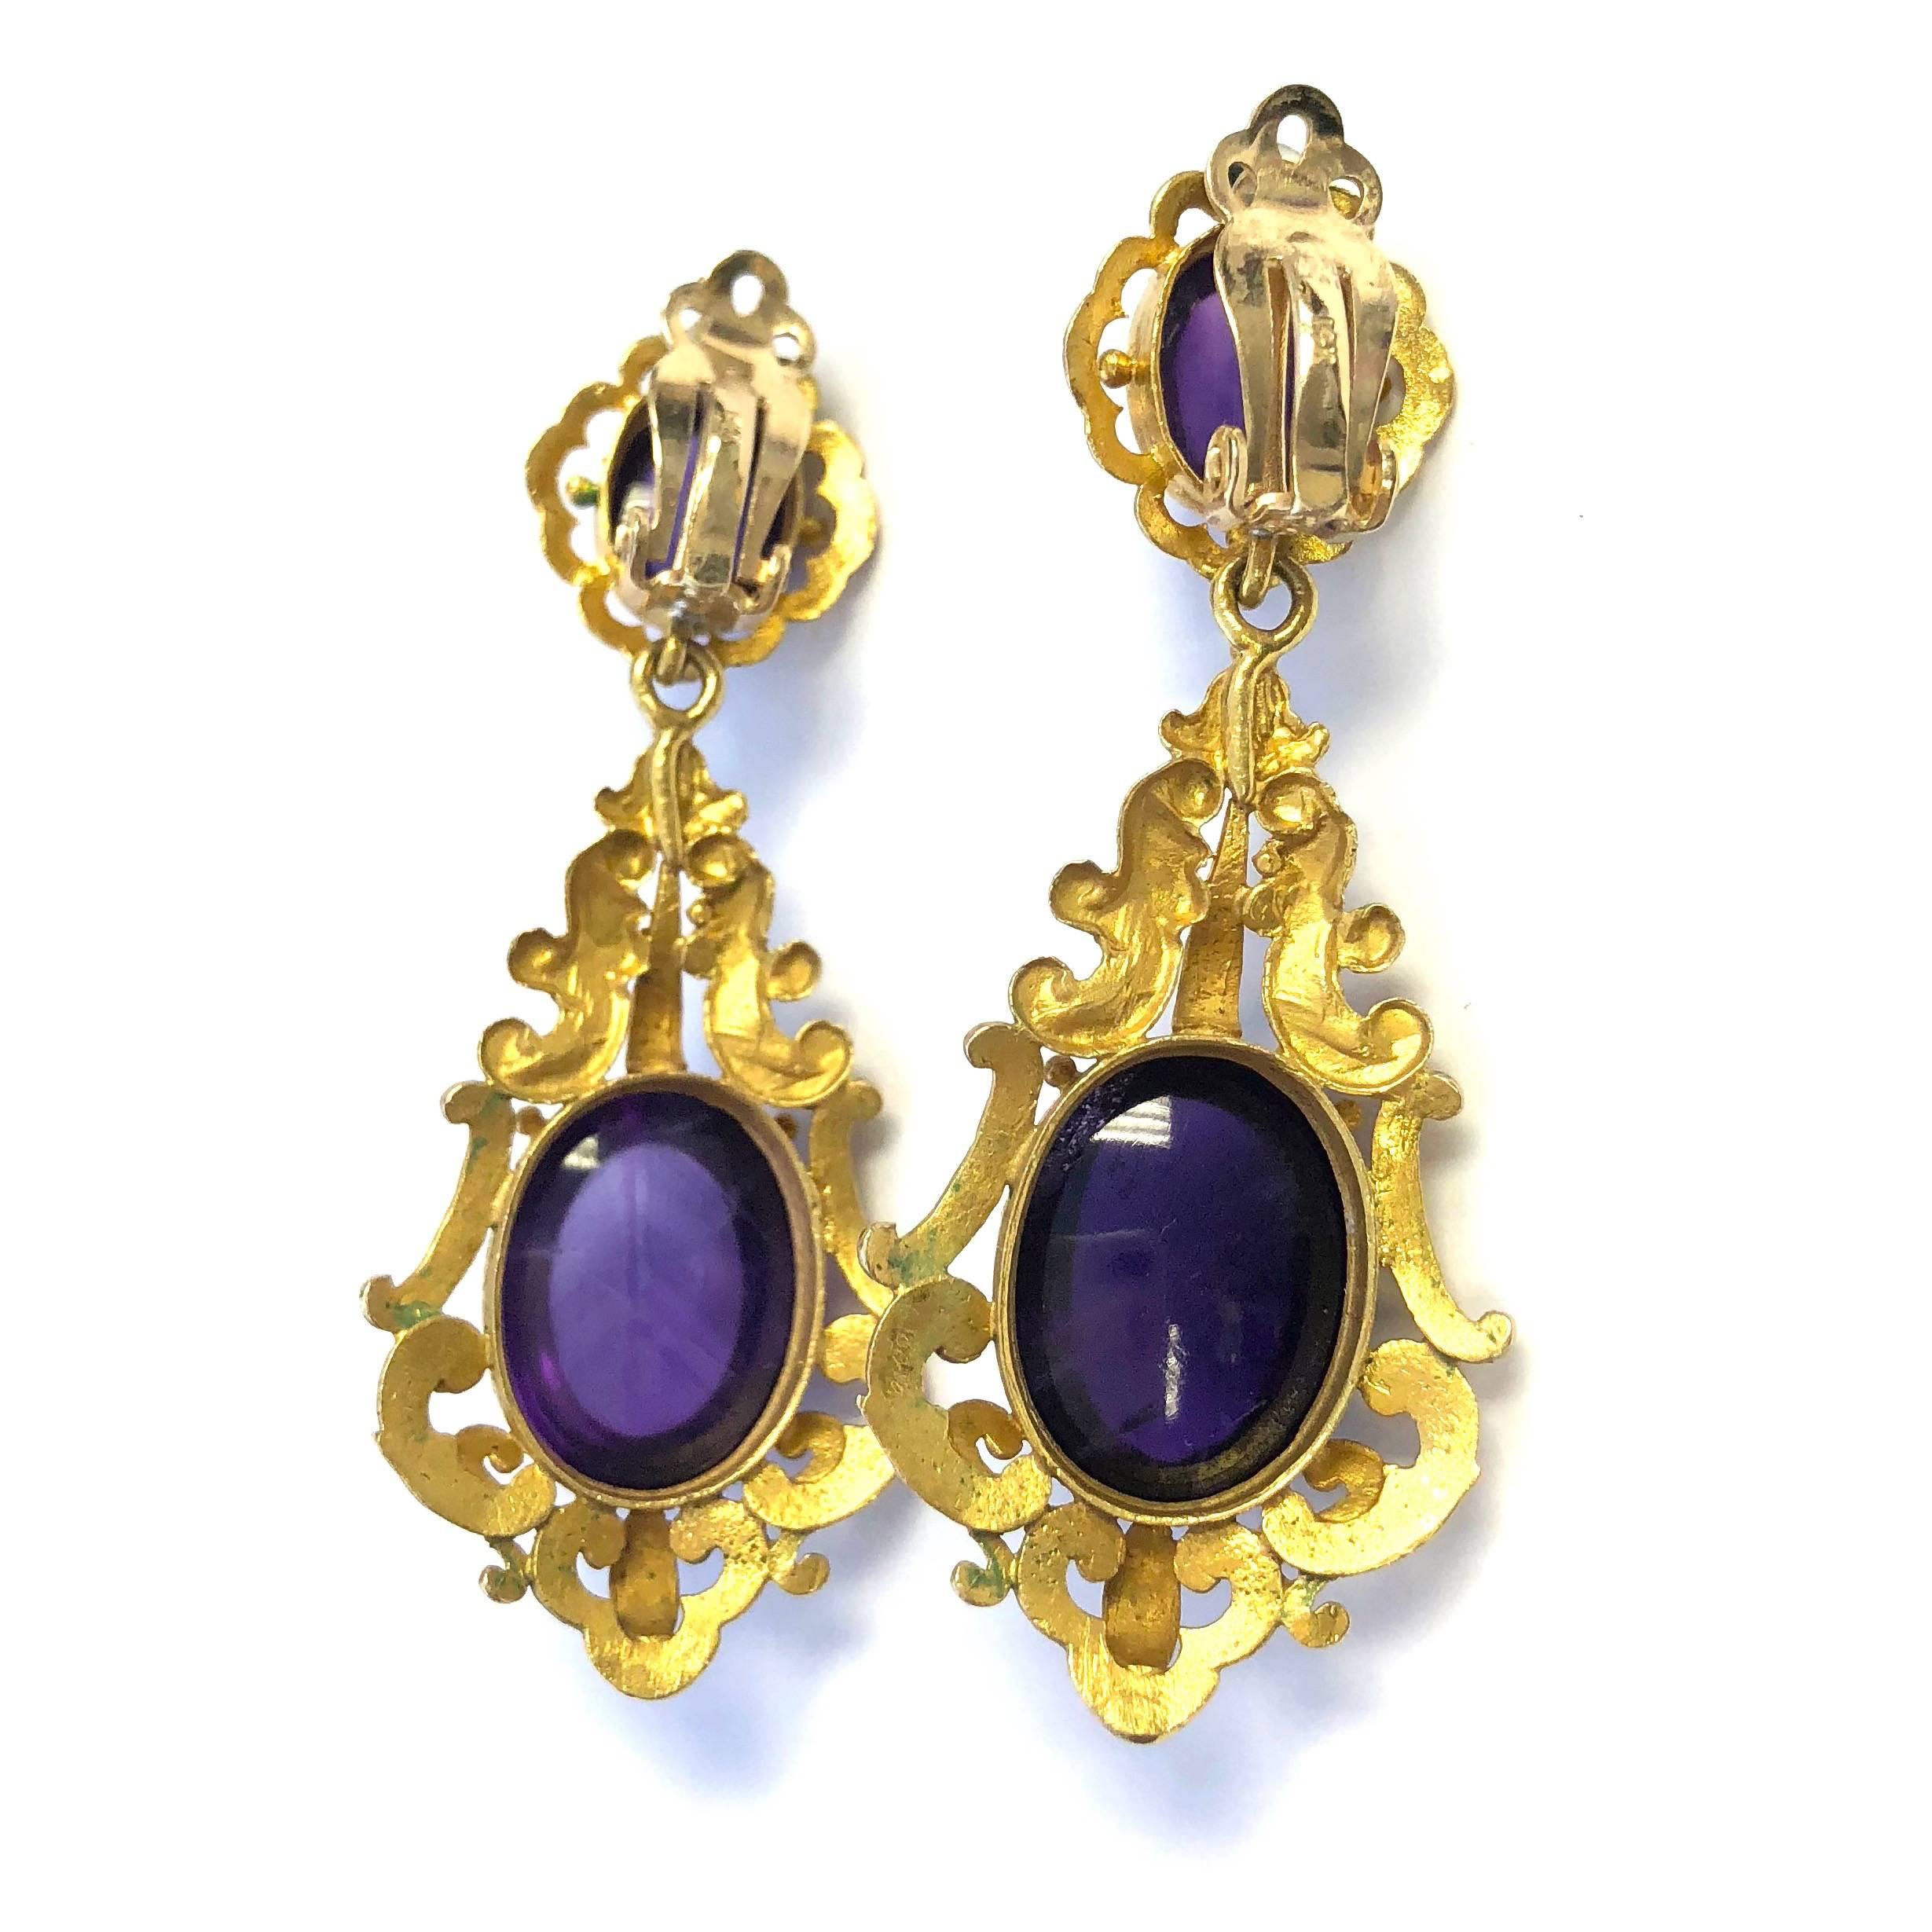 Victorian amethyst and 14K gold pendant earrings, with oval cabochon shaped amethyst drops below oval cabochon cut tops, both claw set to gold scrollwork frames of bold openwork design. Approximate total weight of 4 stones: 24 carats
Measurements: 2